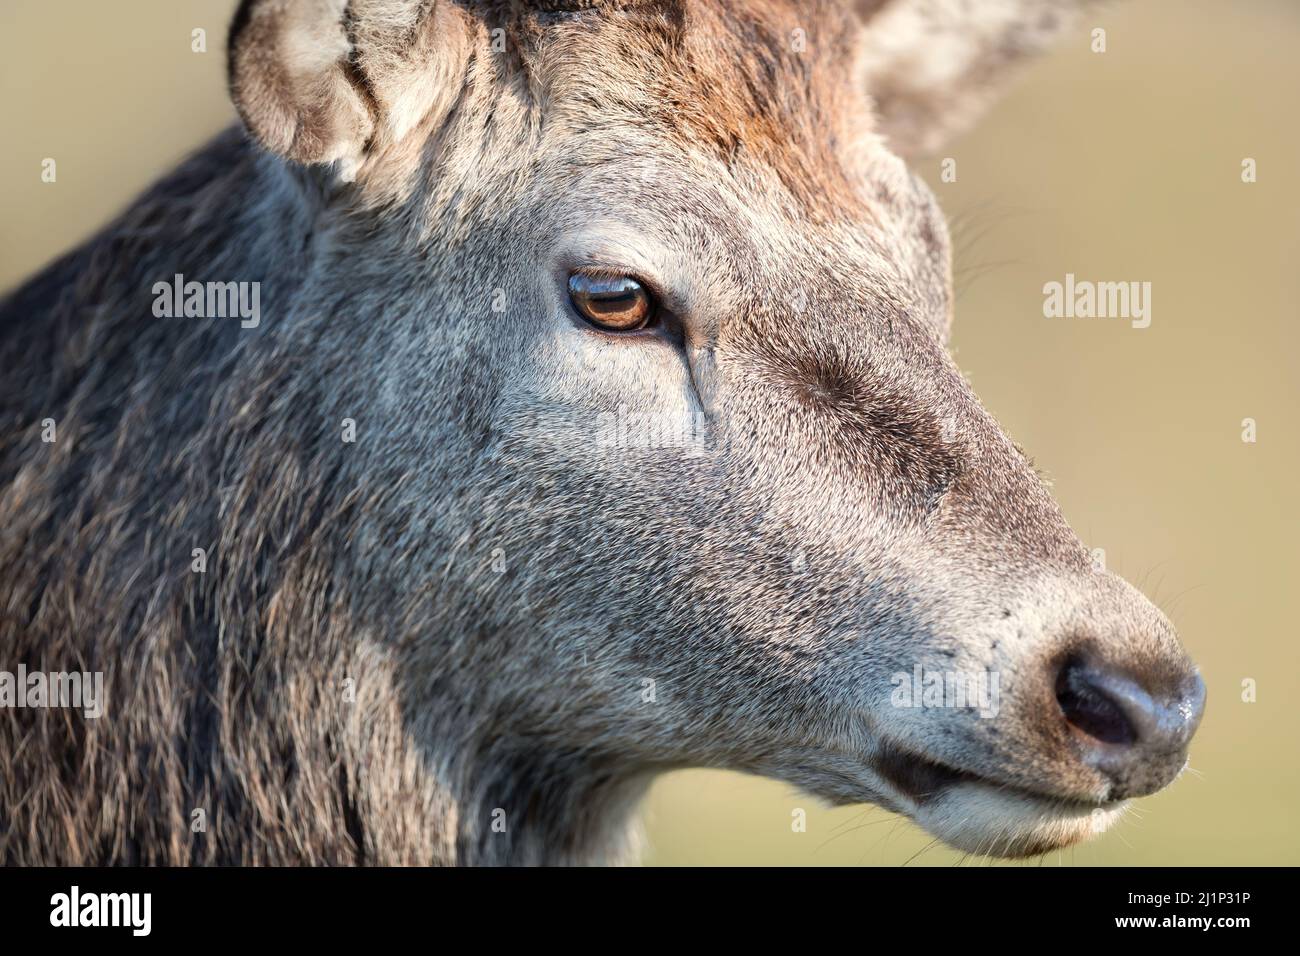 Portrait of a red deer stag against clear background, UK. Stock Photo